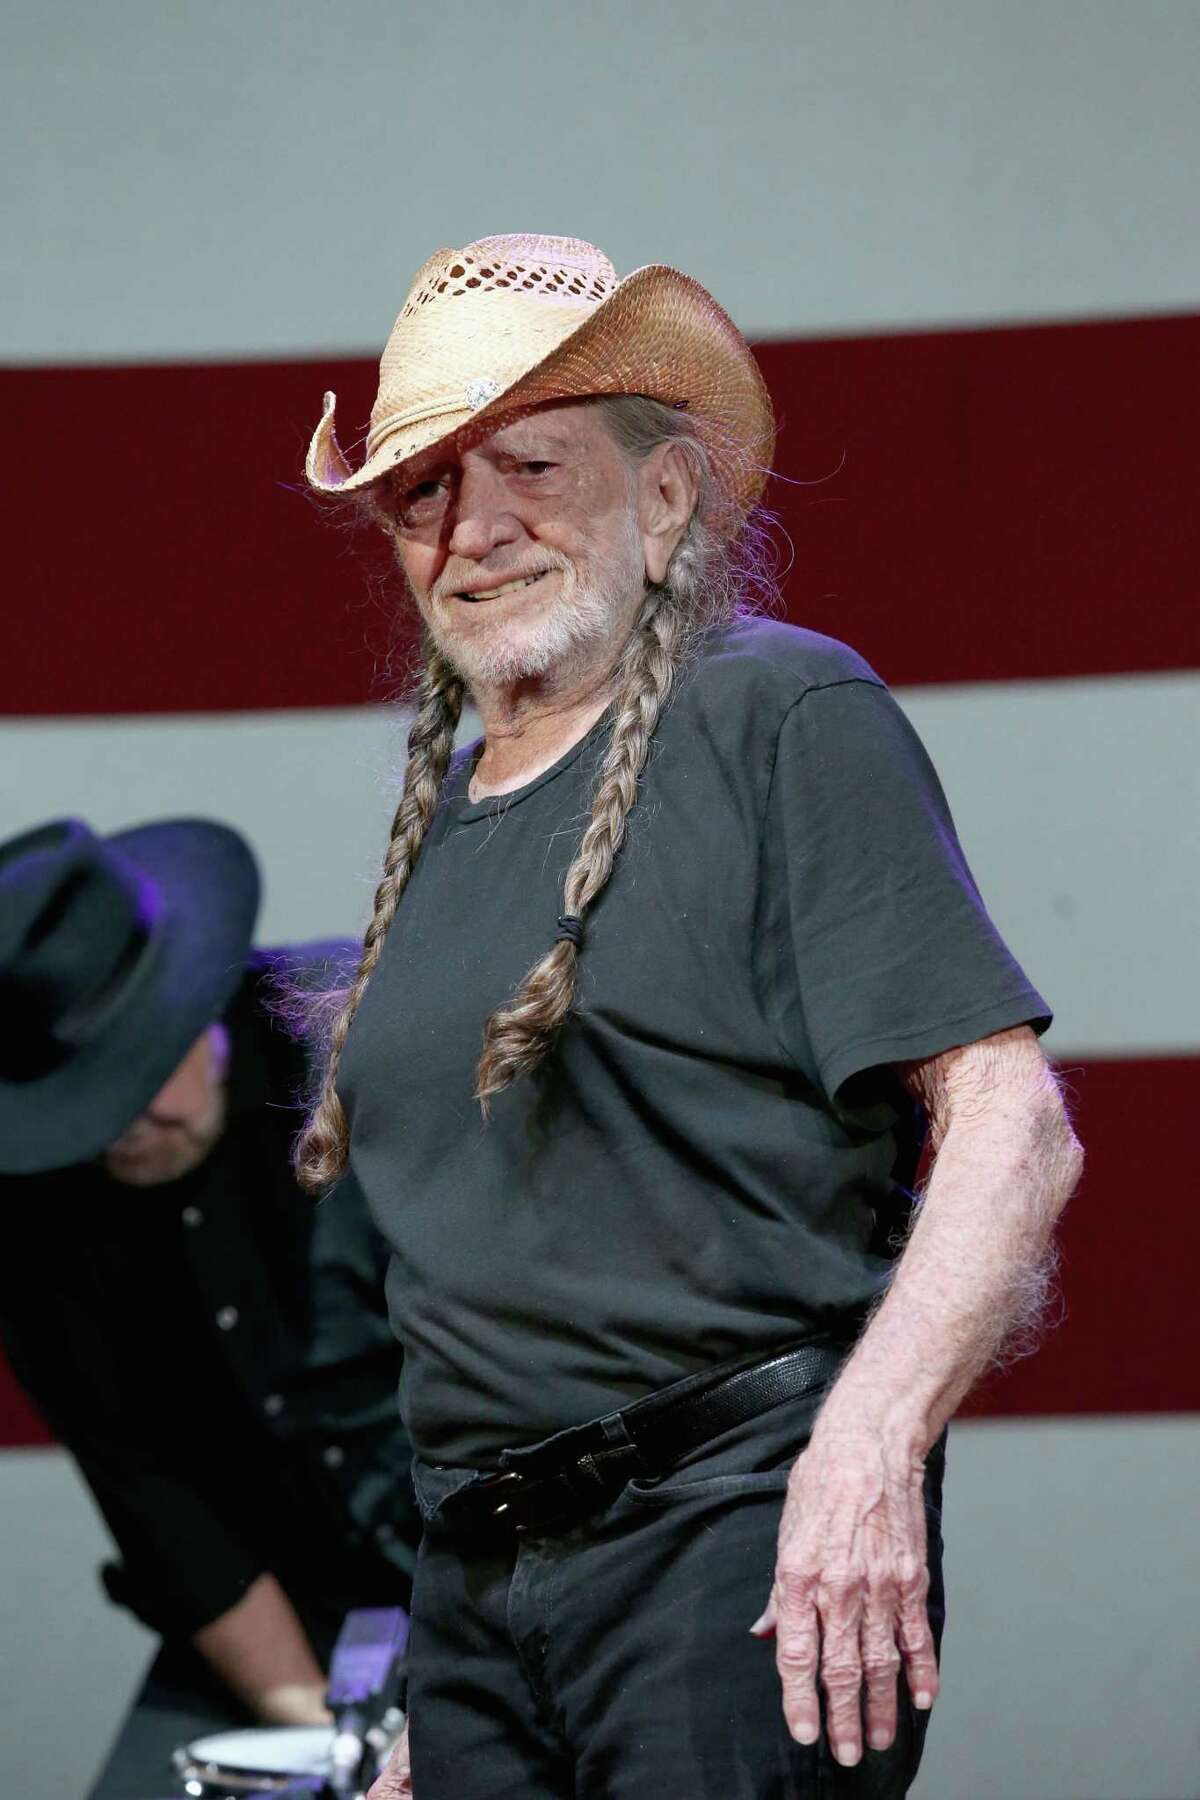 AUSTIN, TEXAS - JULY 04: Willie Nelson performs in concert during his 46th annual Willie Nelson's 4th of July Picnic at Austin360 Amphitheater on July 4, 2019 in Austin, Texas. (Photo by Gary Miller/Getty Images for Shock Ink)